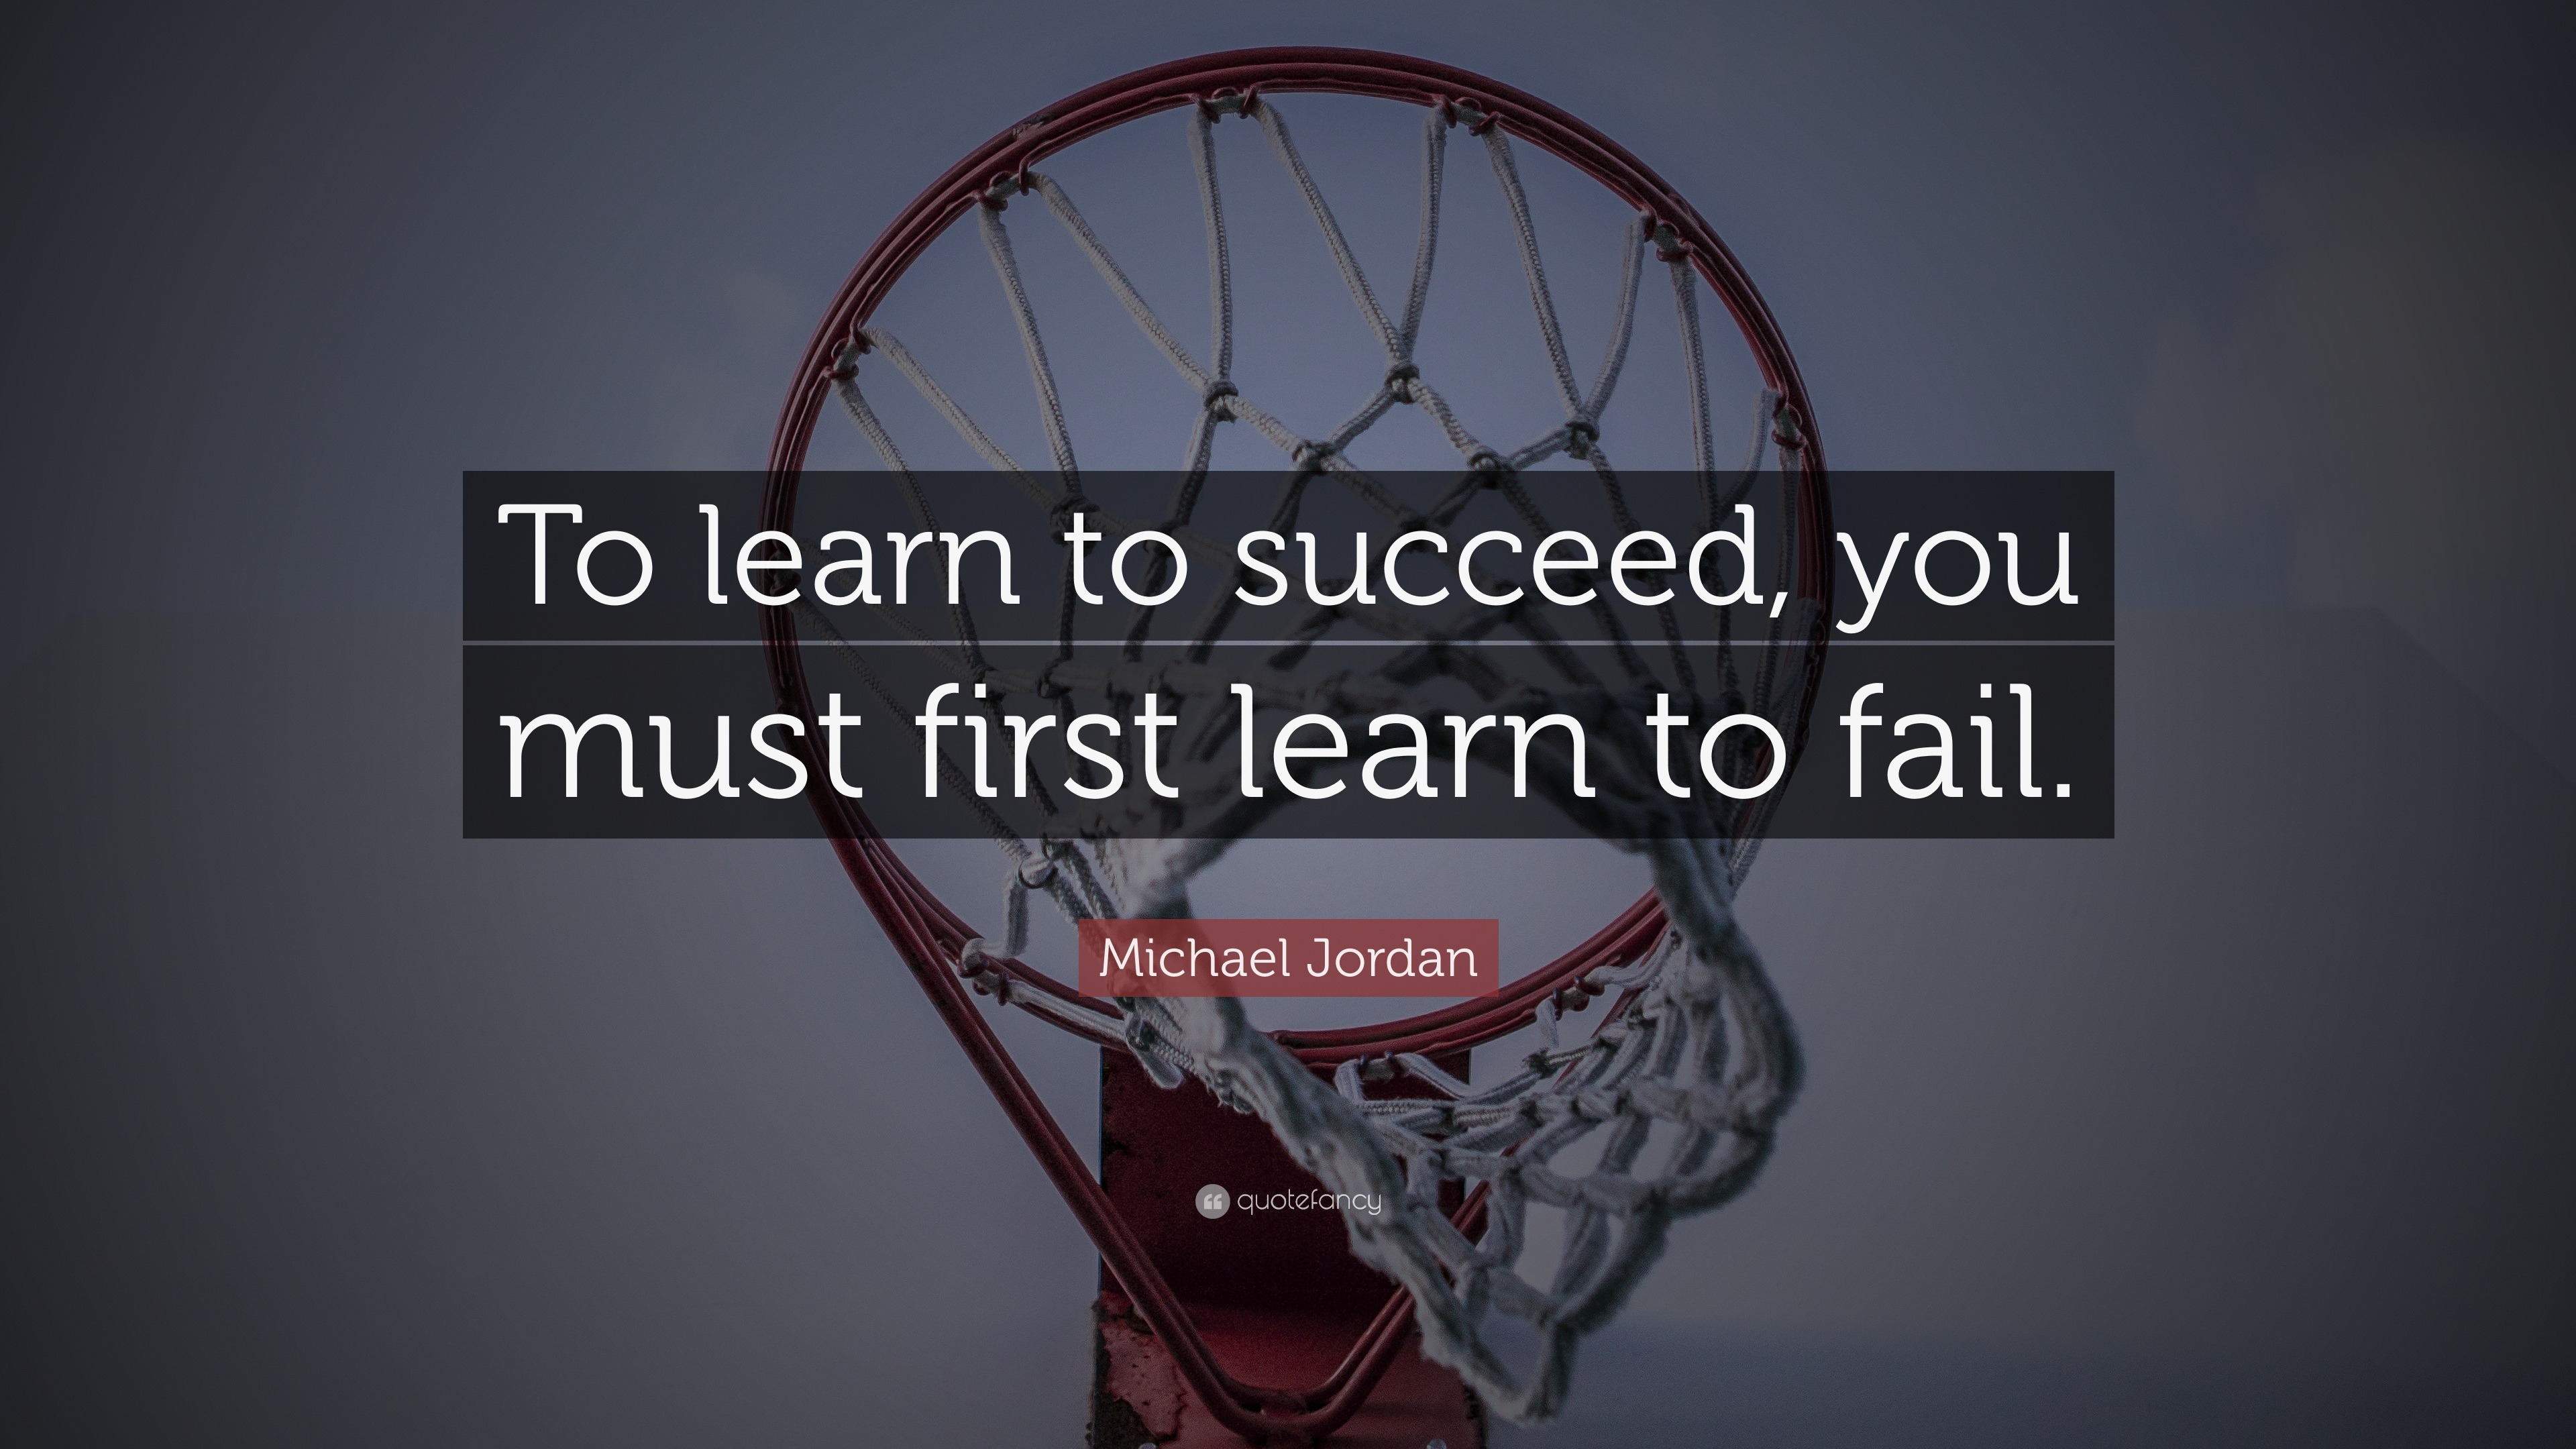 Michael Jordan Quote: “To learn to succeed, you must first learn to fail.”